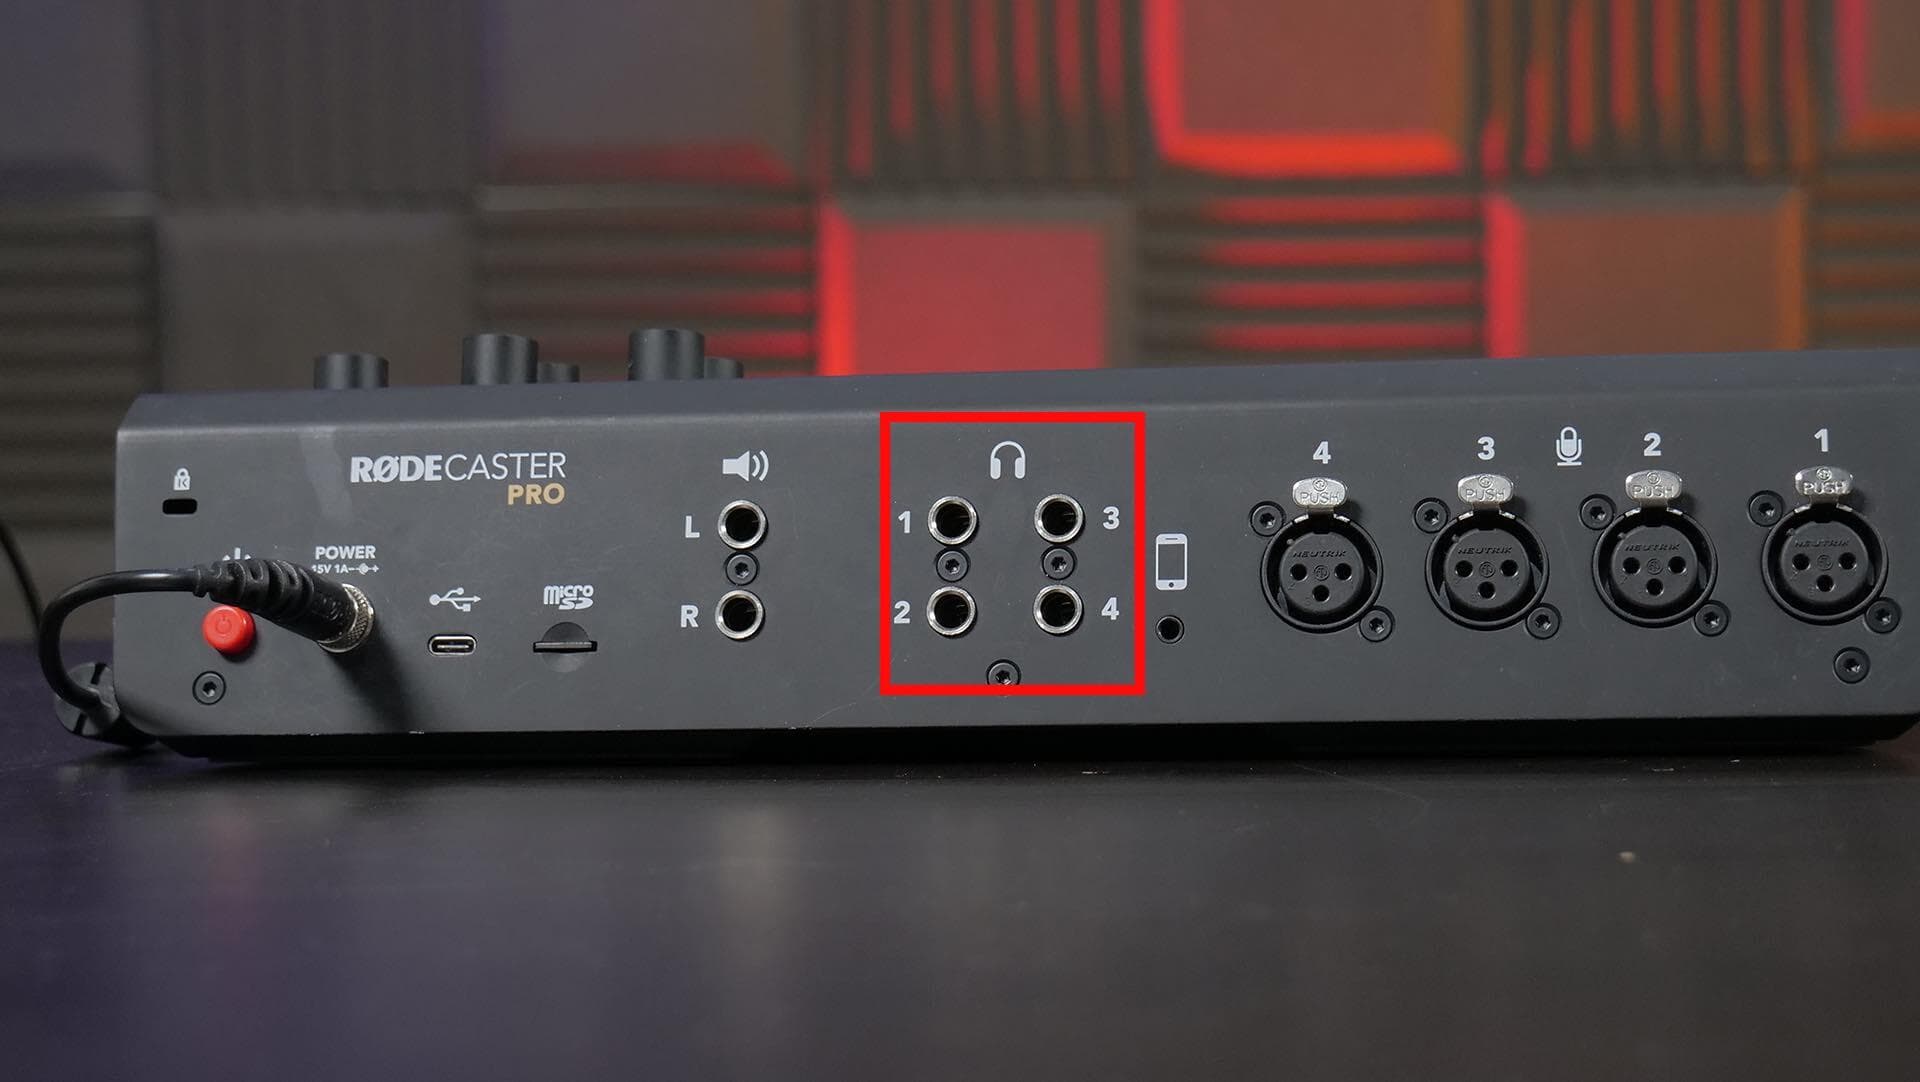 How to Broadcast Live Radio with the Rodecaster Pro Headphone Inputs